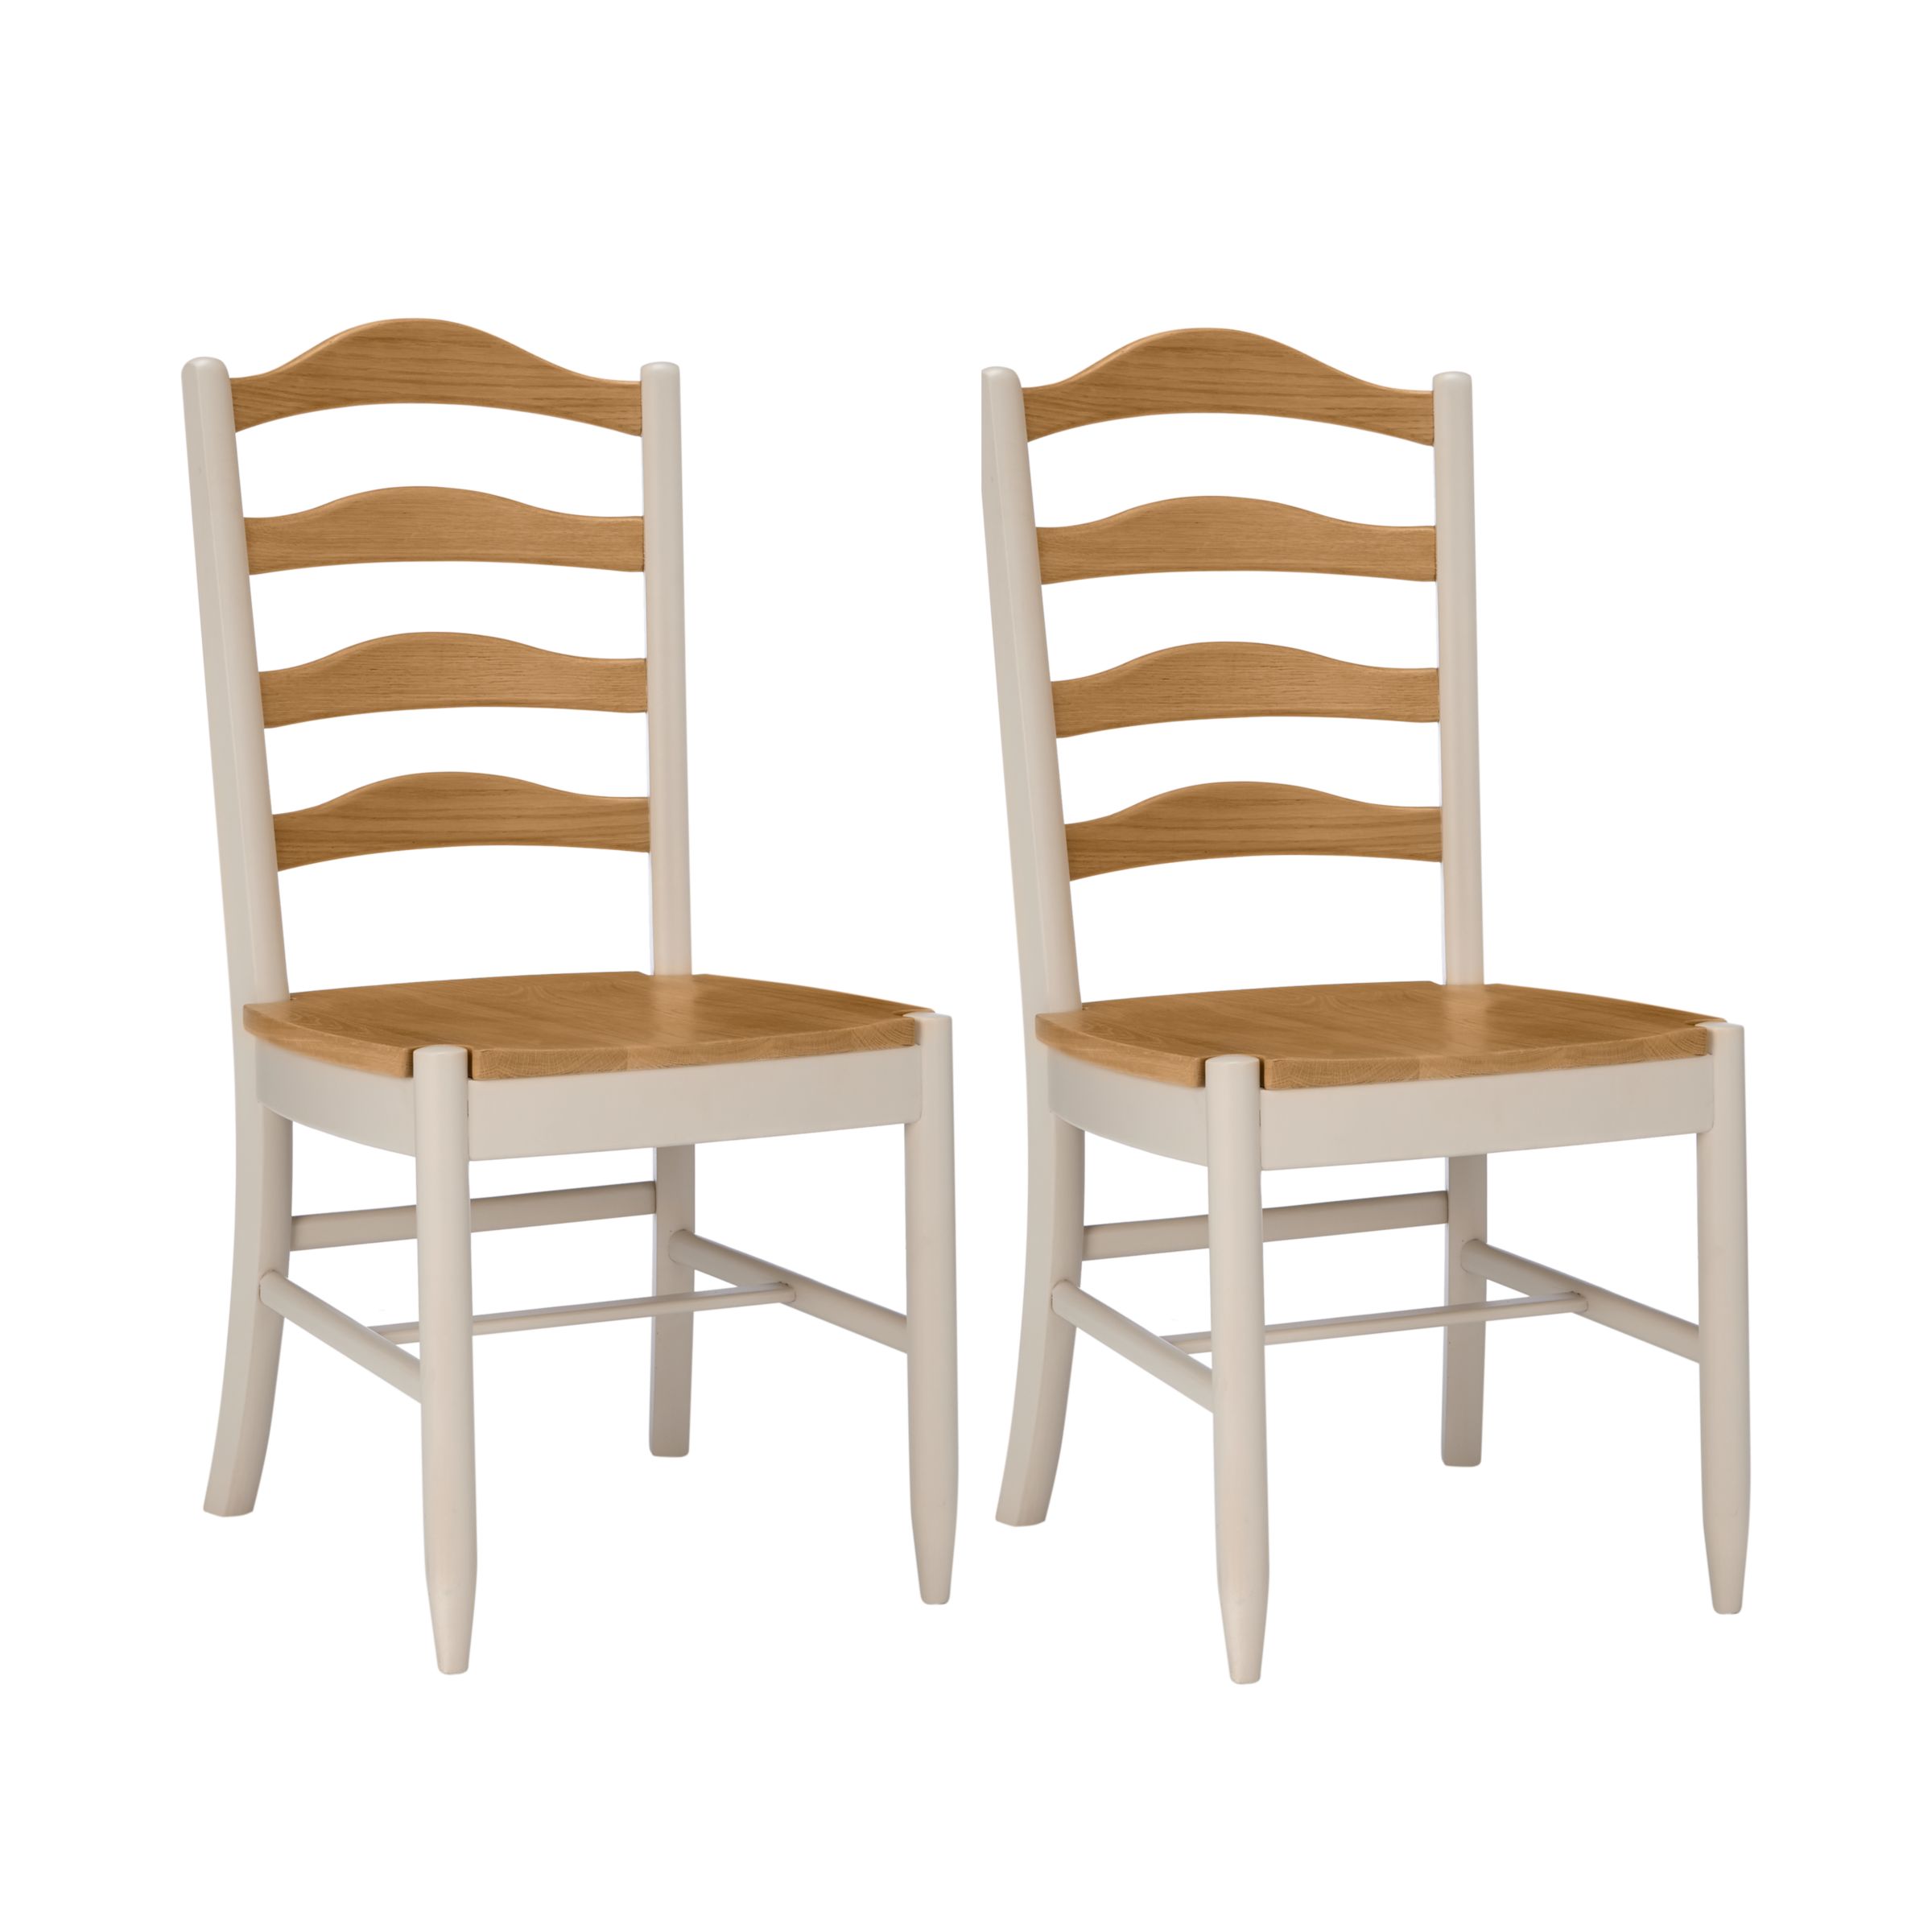 John Lewis & Partners Audley Dining Chairs, Set of Two at John Lewis